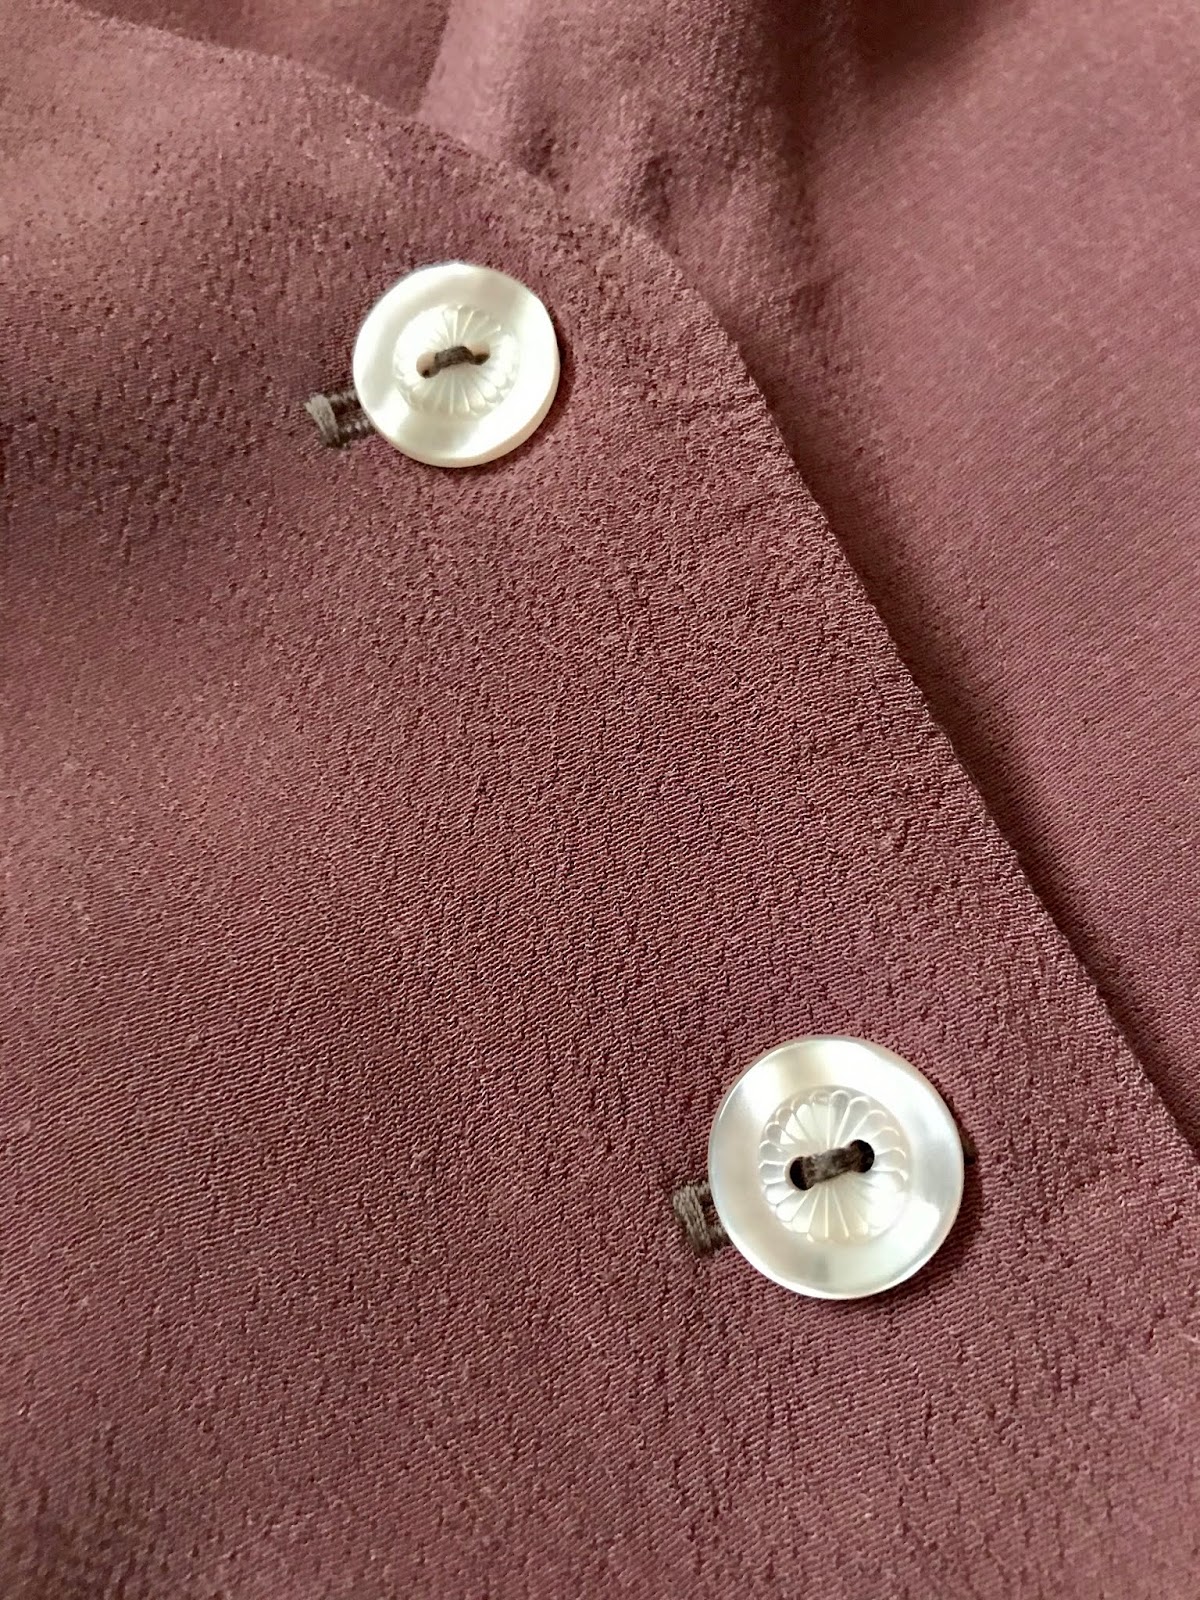 Diary of a Chain Stitcher : Vintage Rose Rayon Kalle Shirt Hack